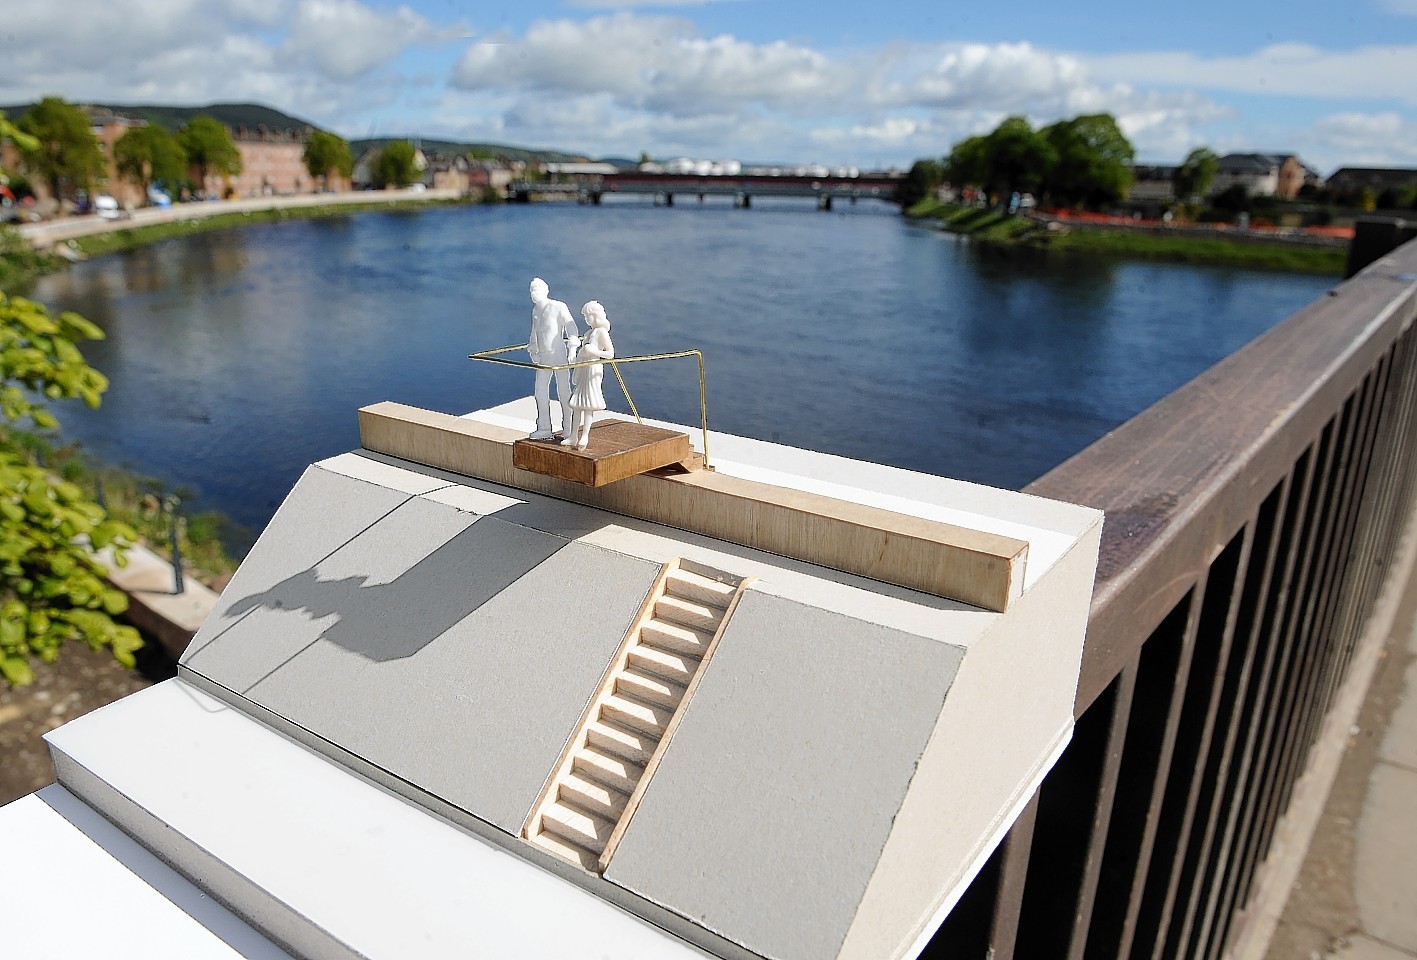 A model of one of the proposed designs for the River Ness Artwork